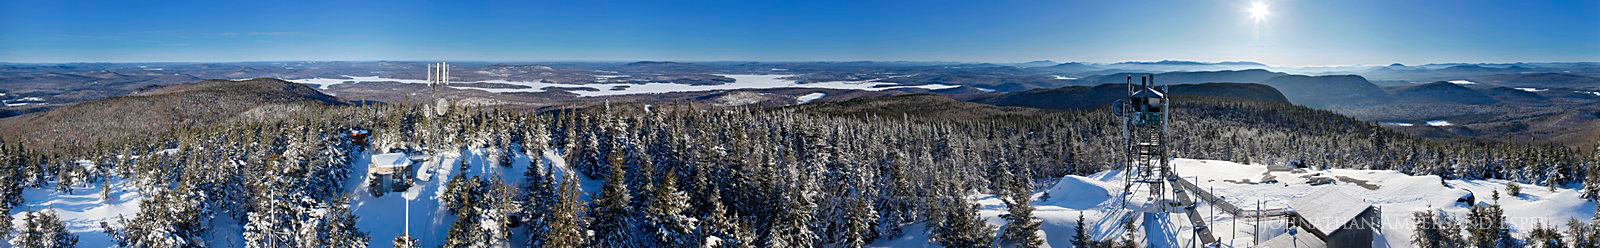  Mt Morris winter 360° aerial view over Tupper Lake region and Adirondack High Peaks to the east. *Sale!  60" panoramic mounted...